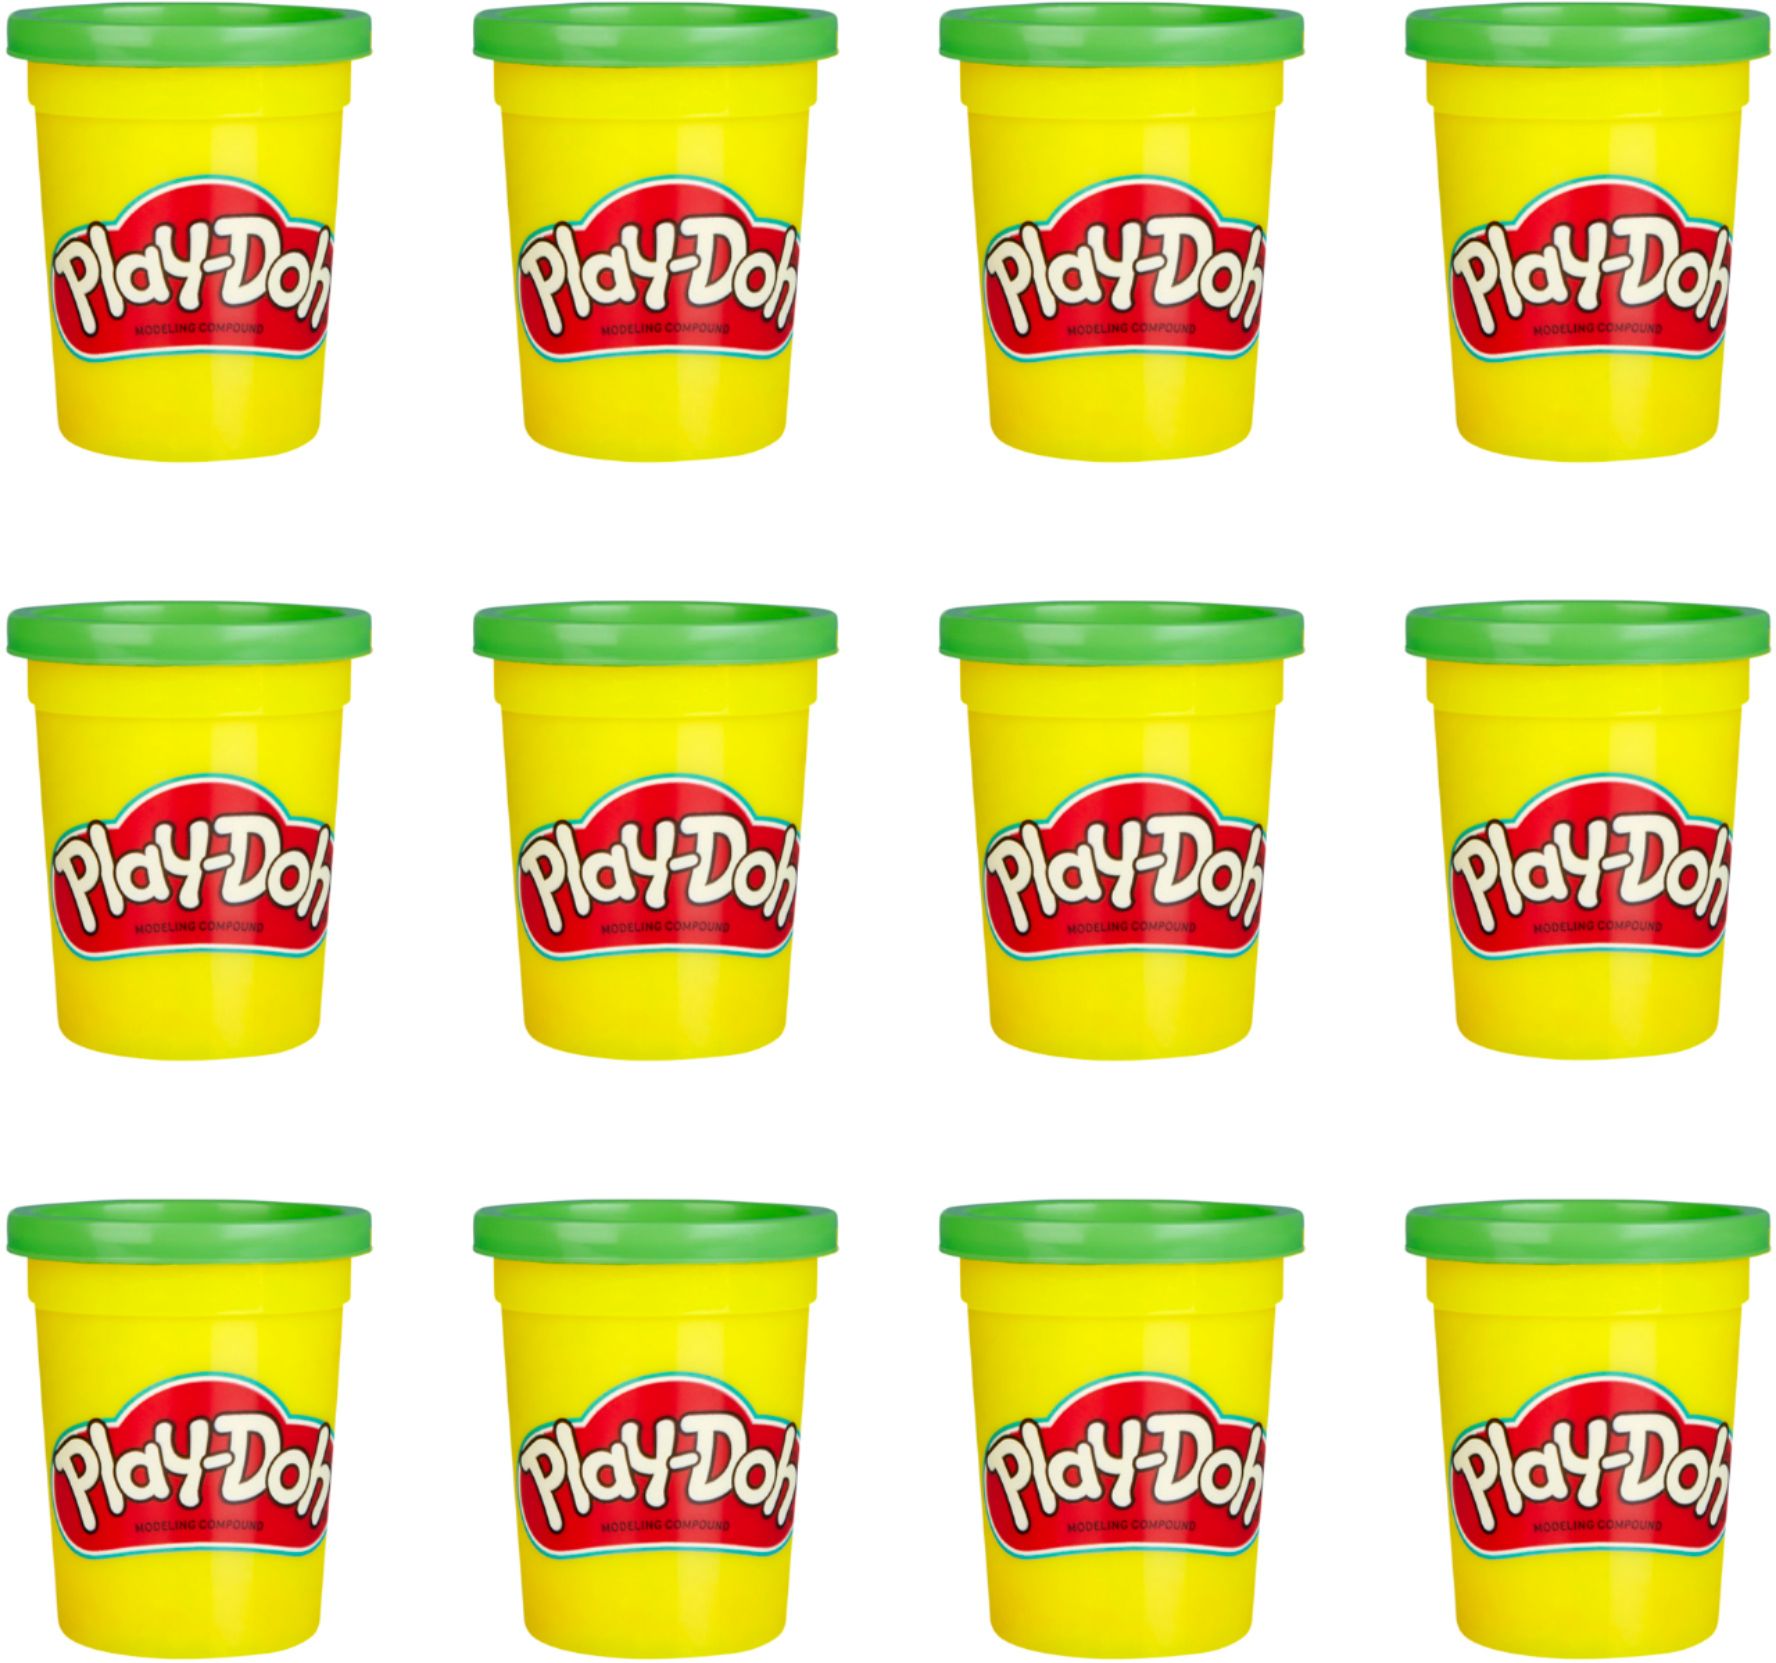 Play-doh - 12 Individual Cans Of Green Play-doh. Bulk Pack Includes 4 oz.  in Each Can. Brand New! - Arts & Crafts